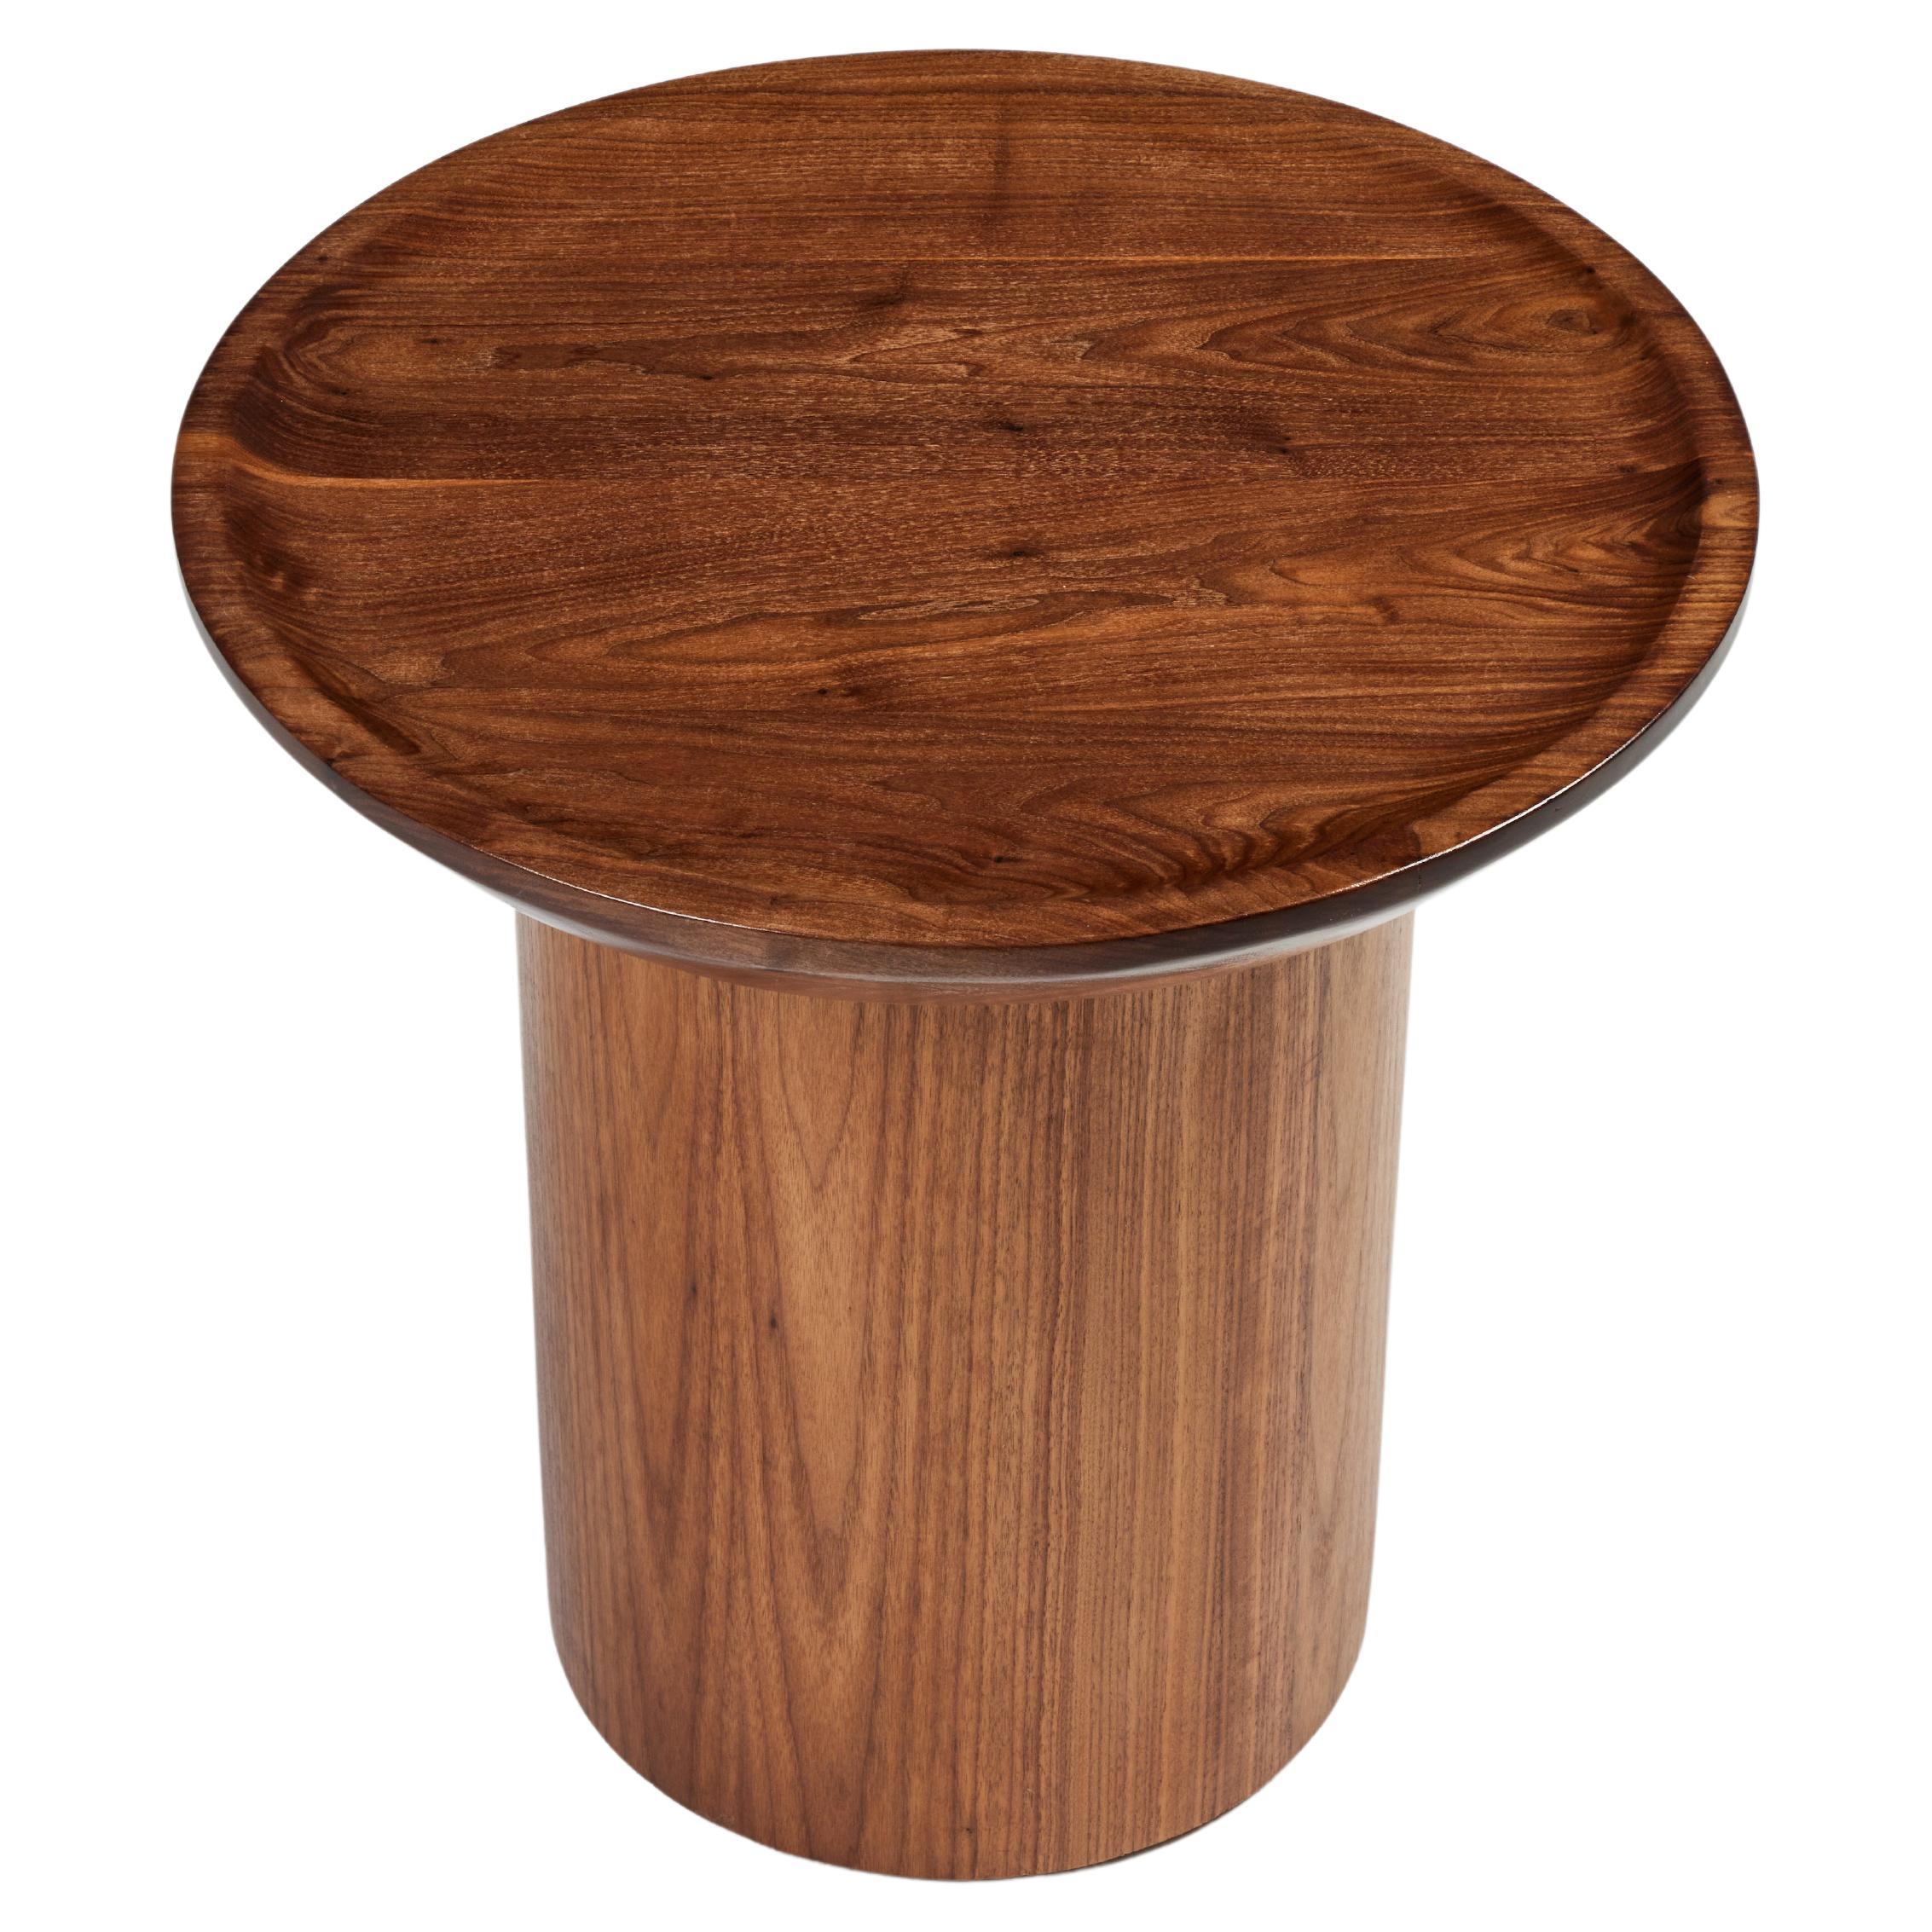 Martin & Brockett 's Findley Round Tall Side Table features the Findley Collection's signature carved, curved lip edge on the table top and a round pedestal base.

It is shown here in Walnut.

Each piece is individually crafted; slight variations in